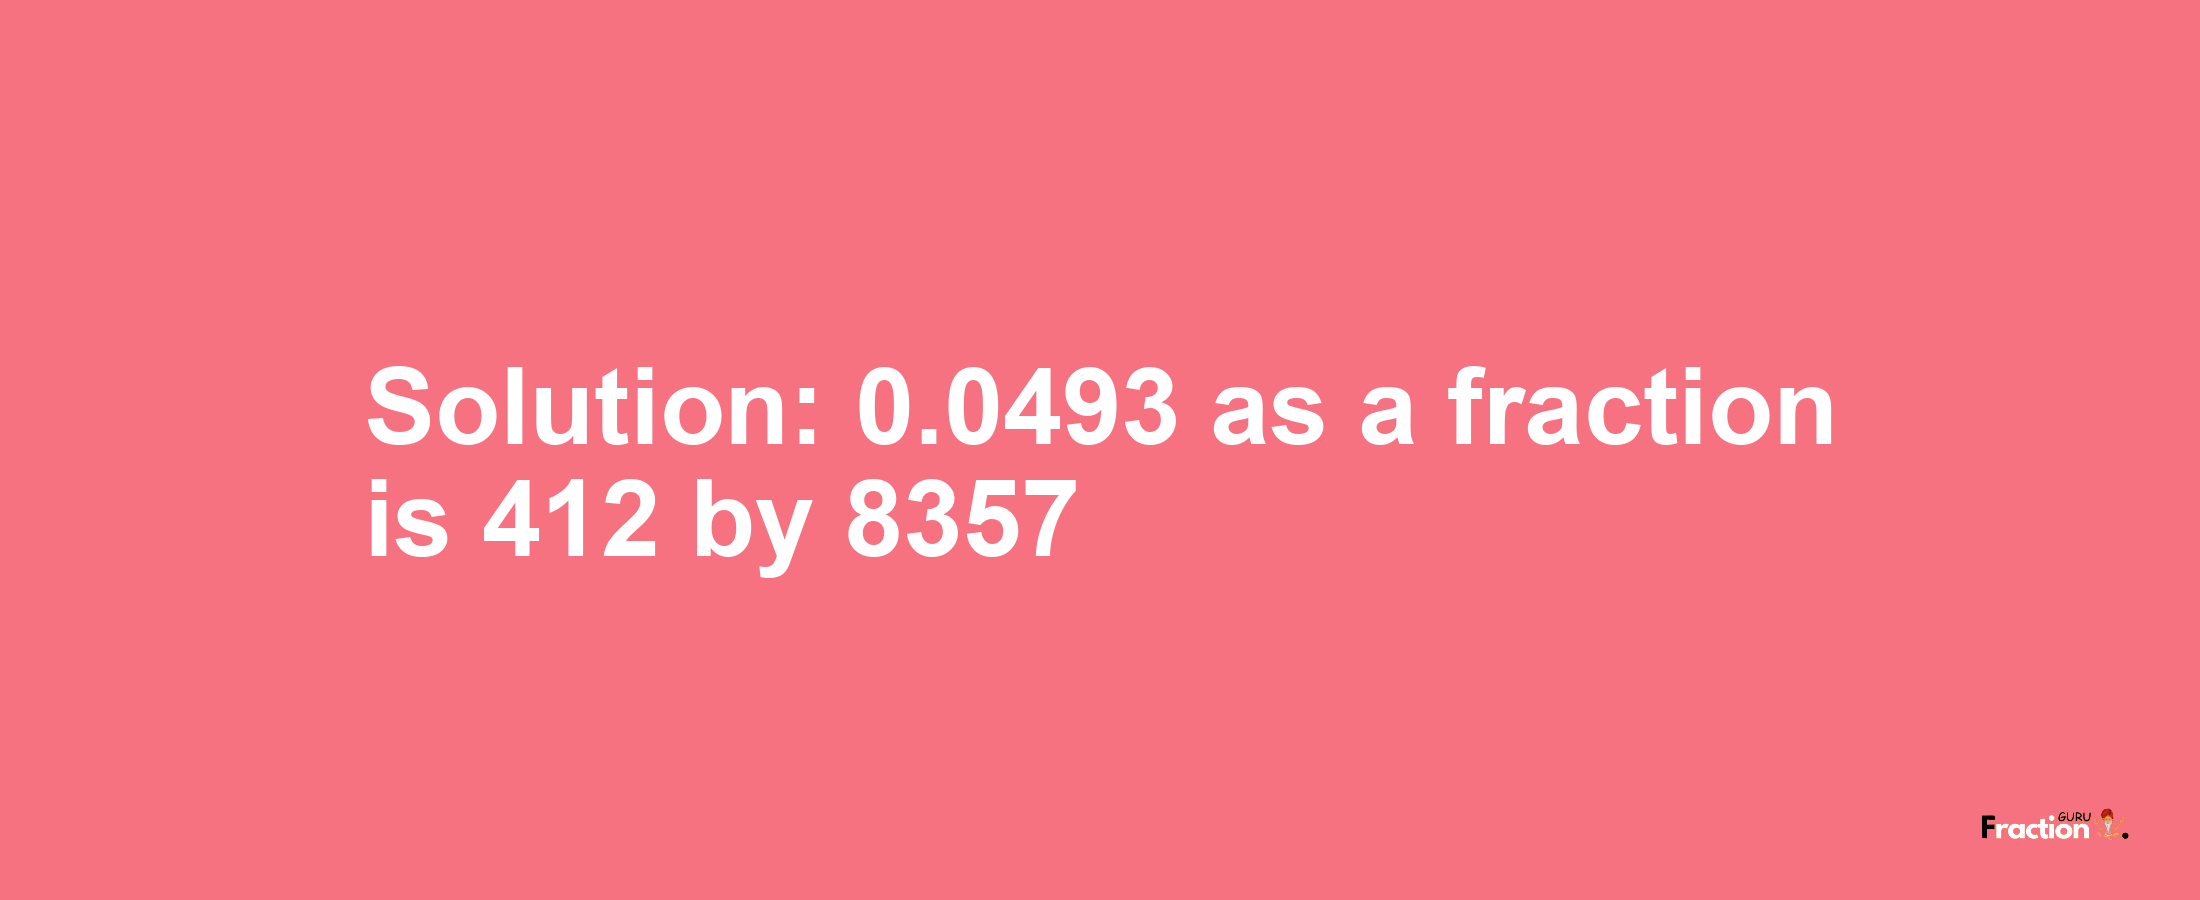 Solution:0.0493 as a fraction is 412/8357